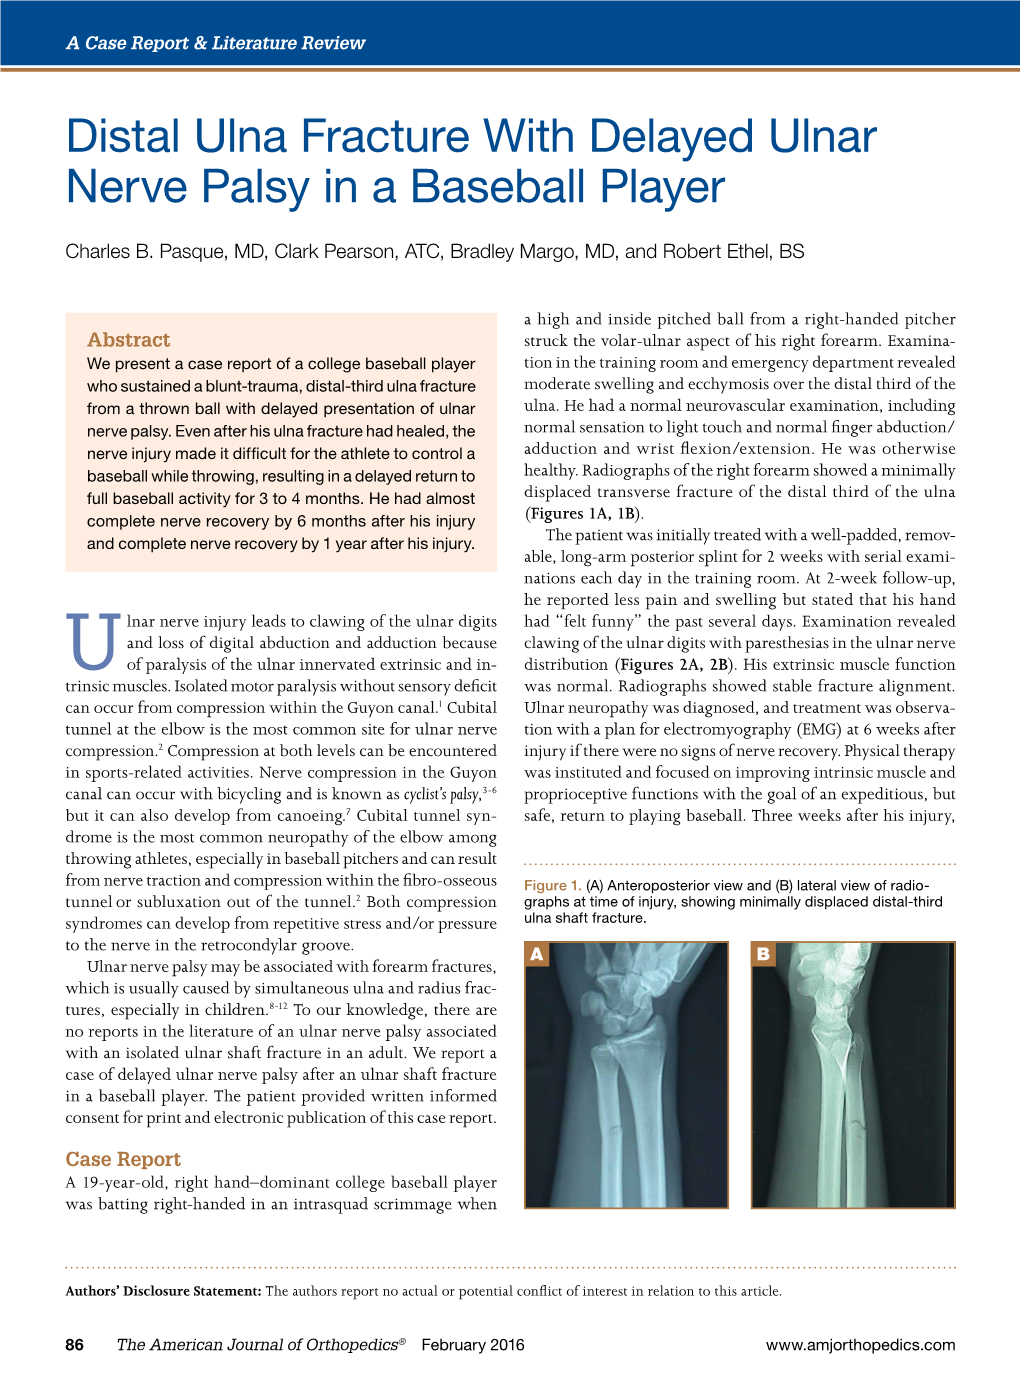 Distal Ulna Fracture with Delayed Ulnar Nerve Palsy in a Baseball Player